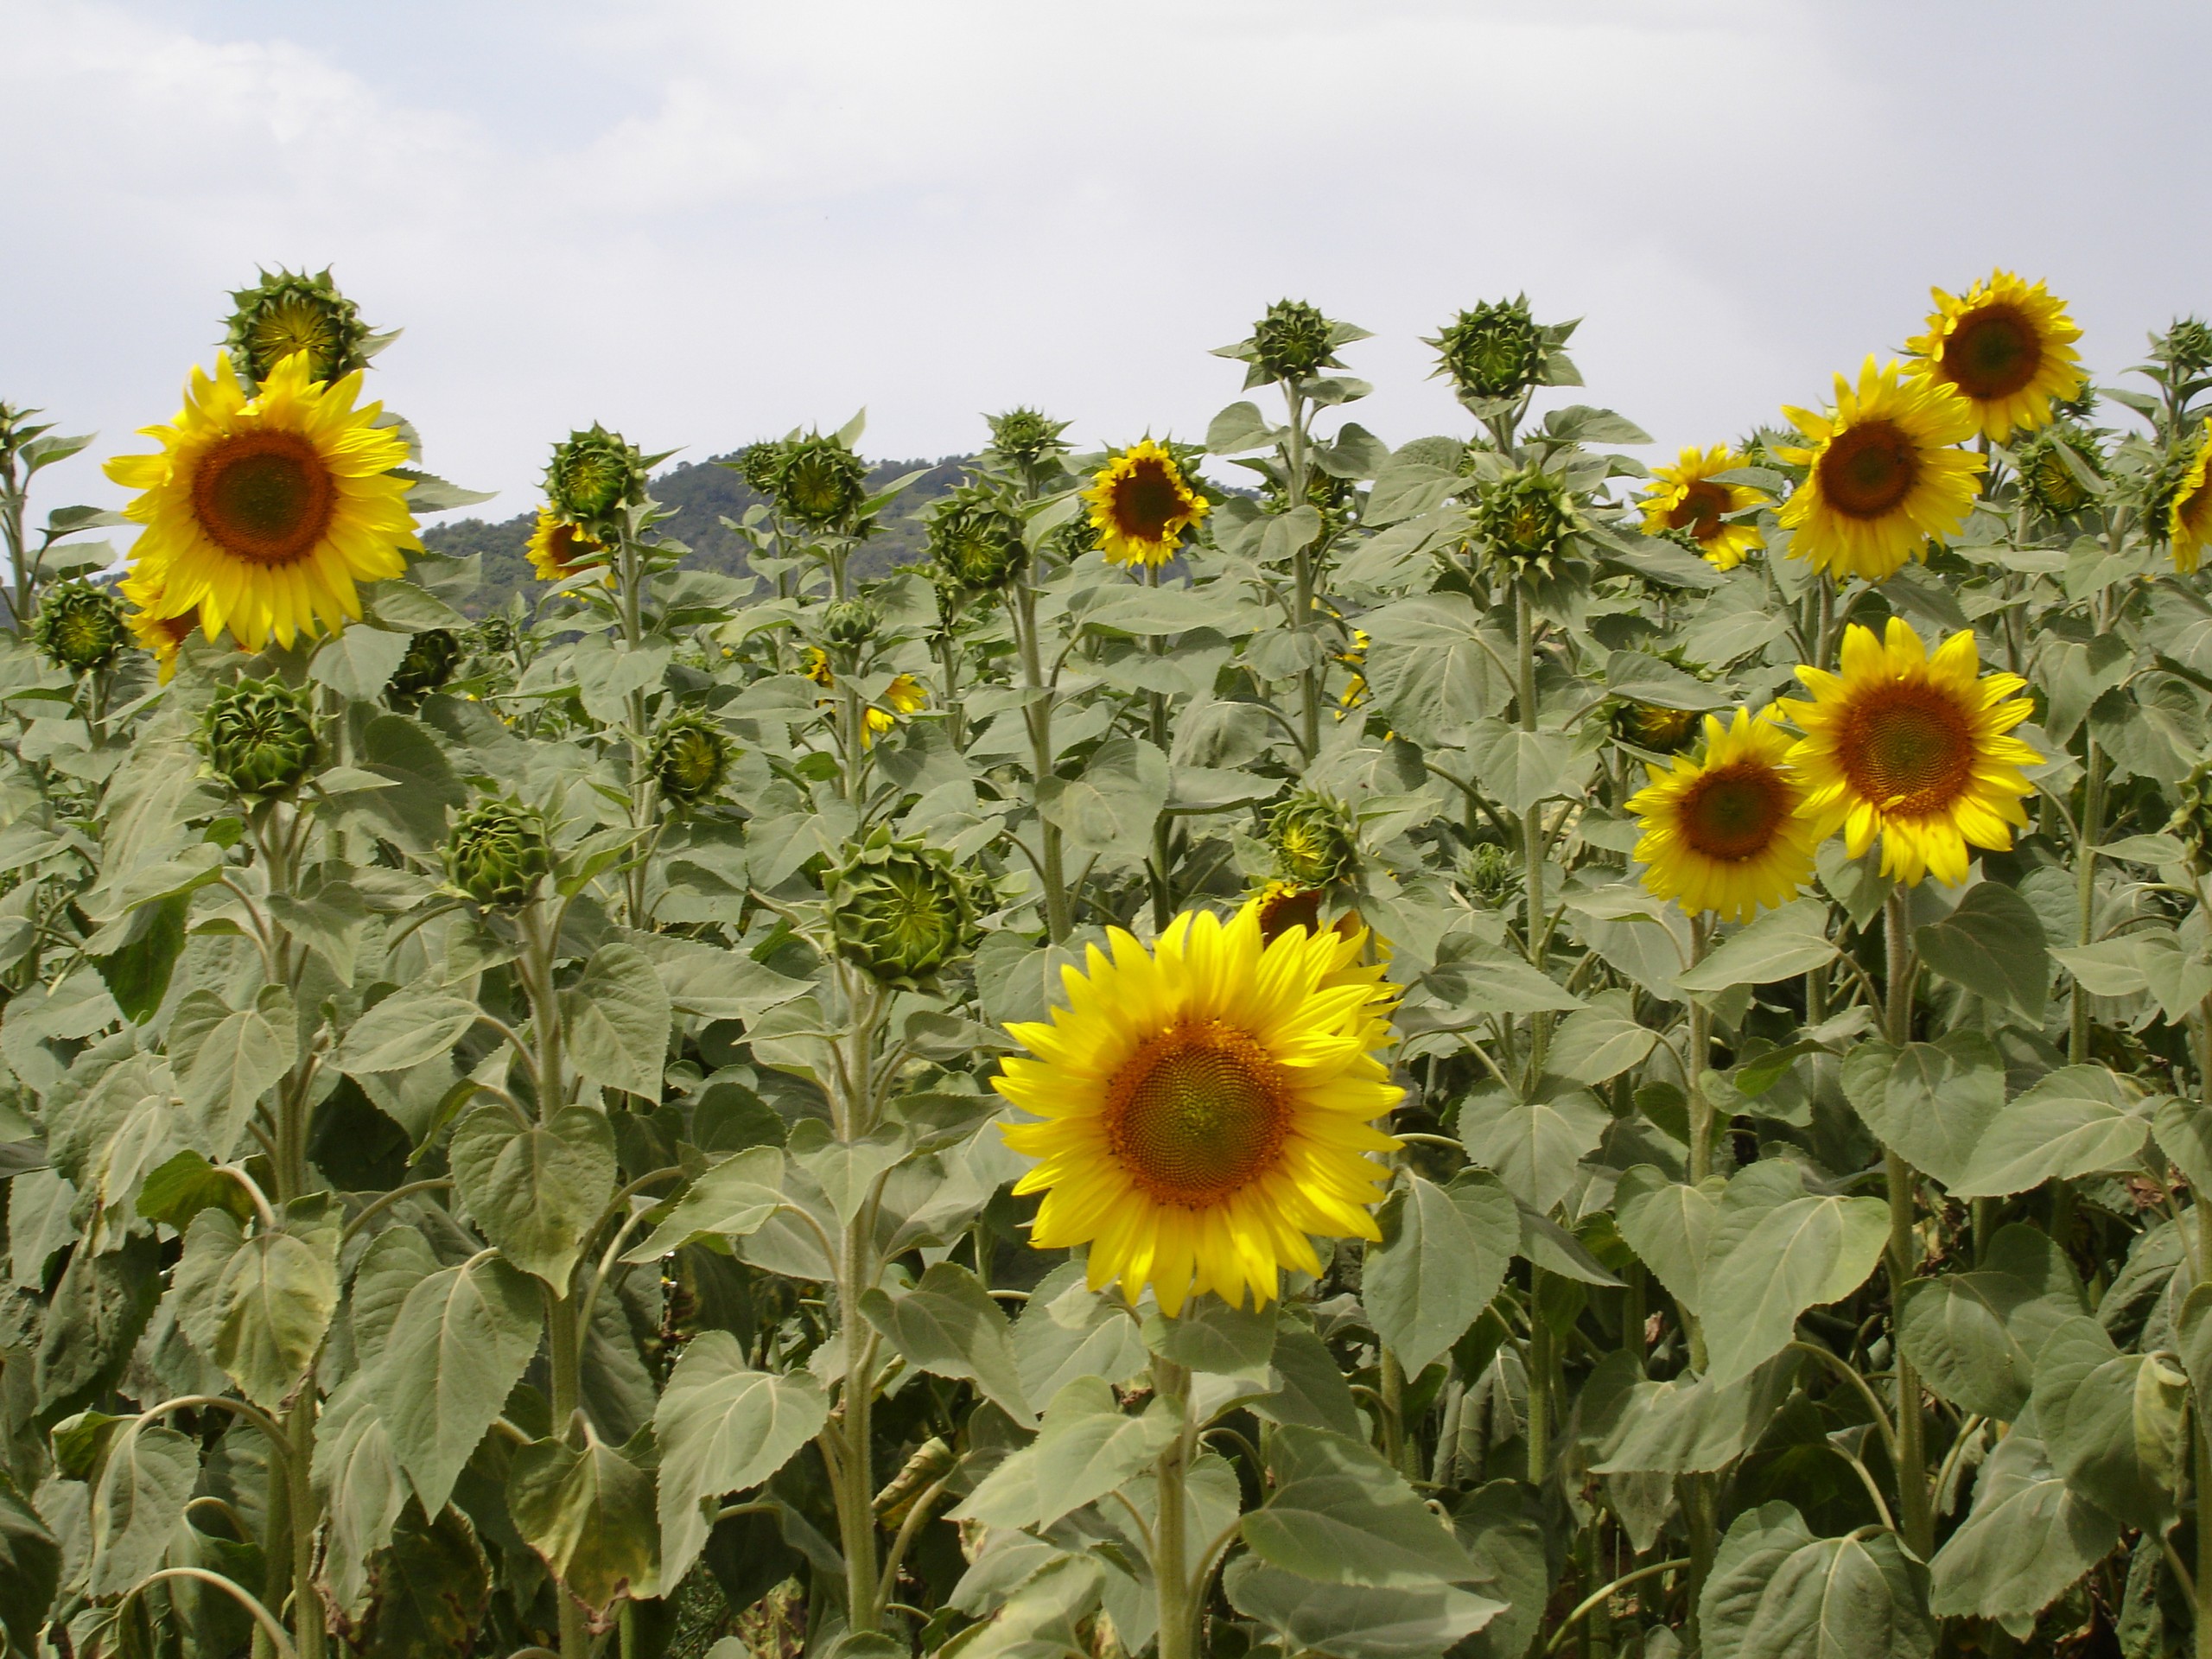 Sunflowers seen on self-guided tour in Catalonia